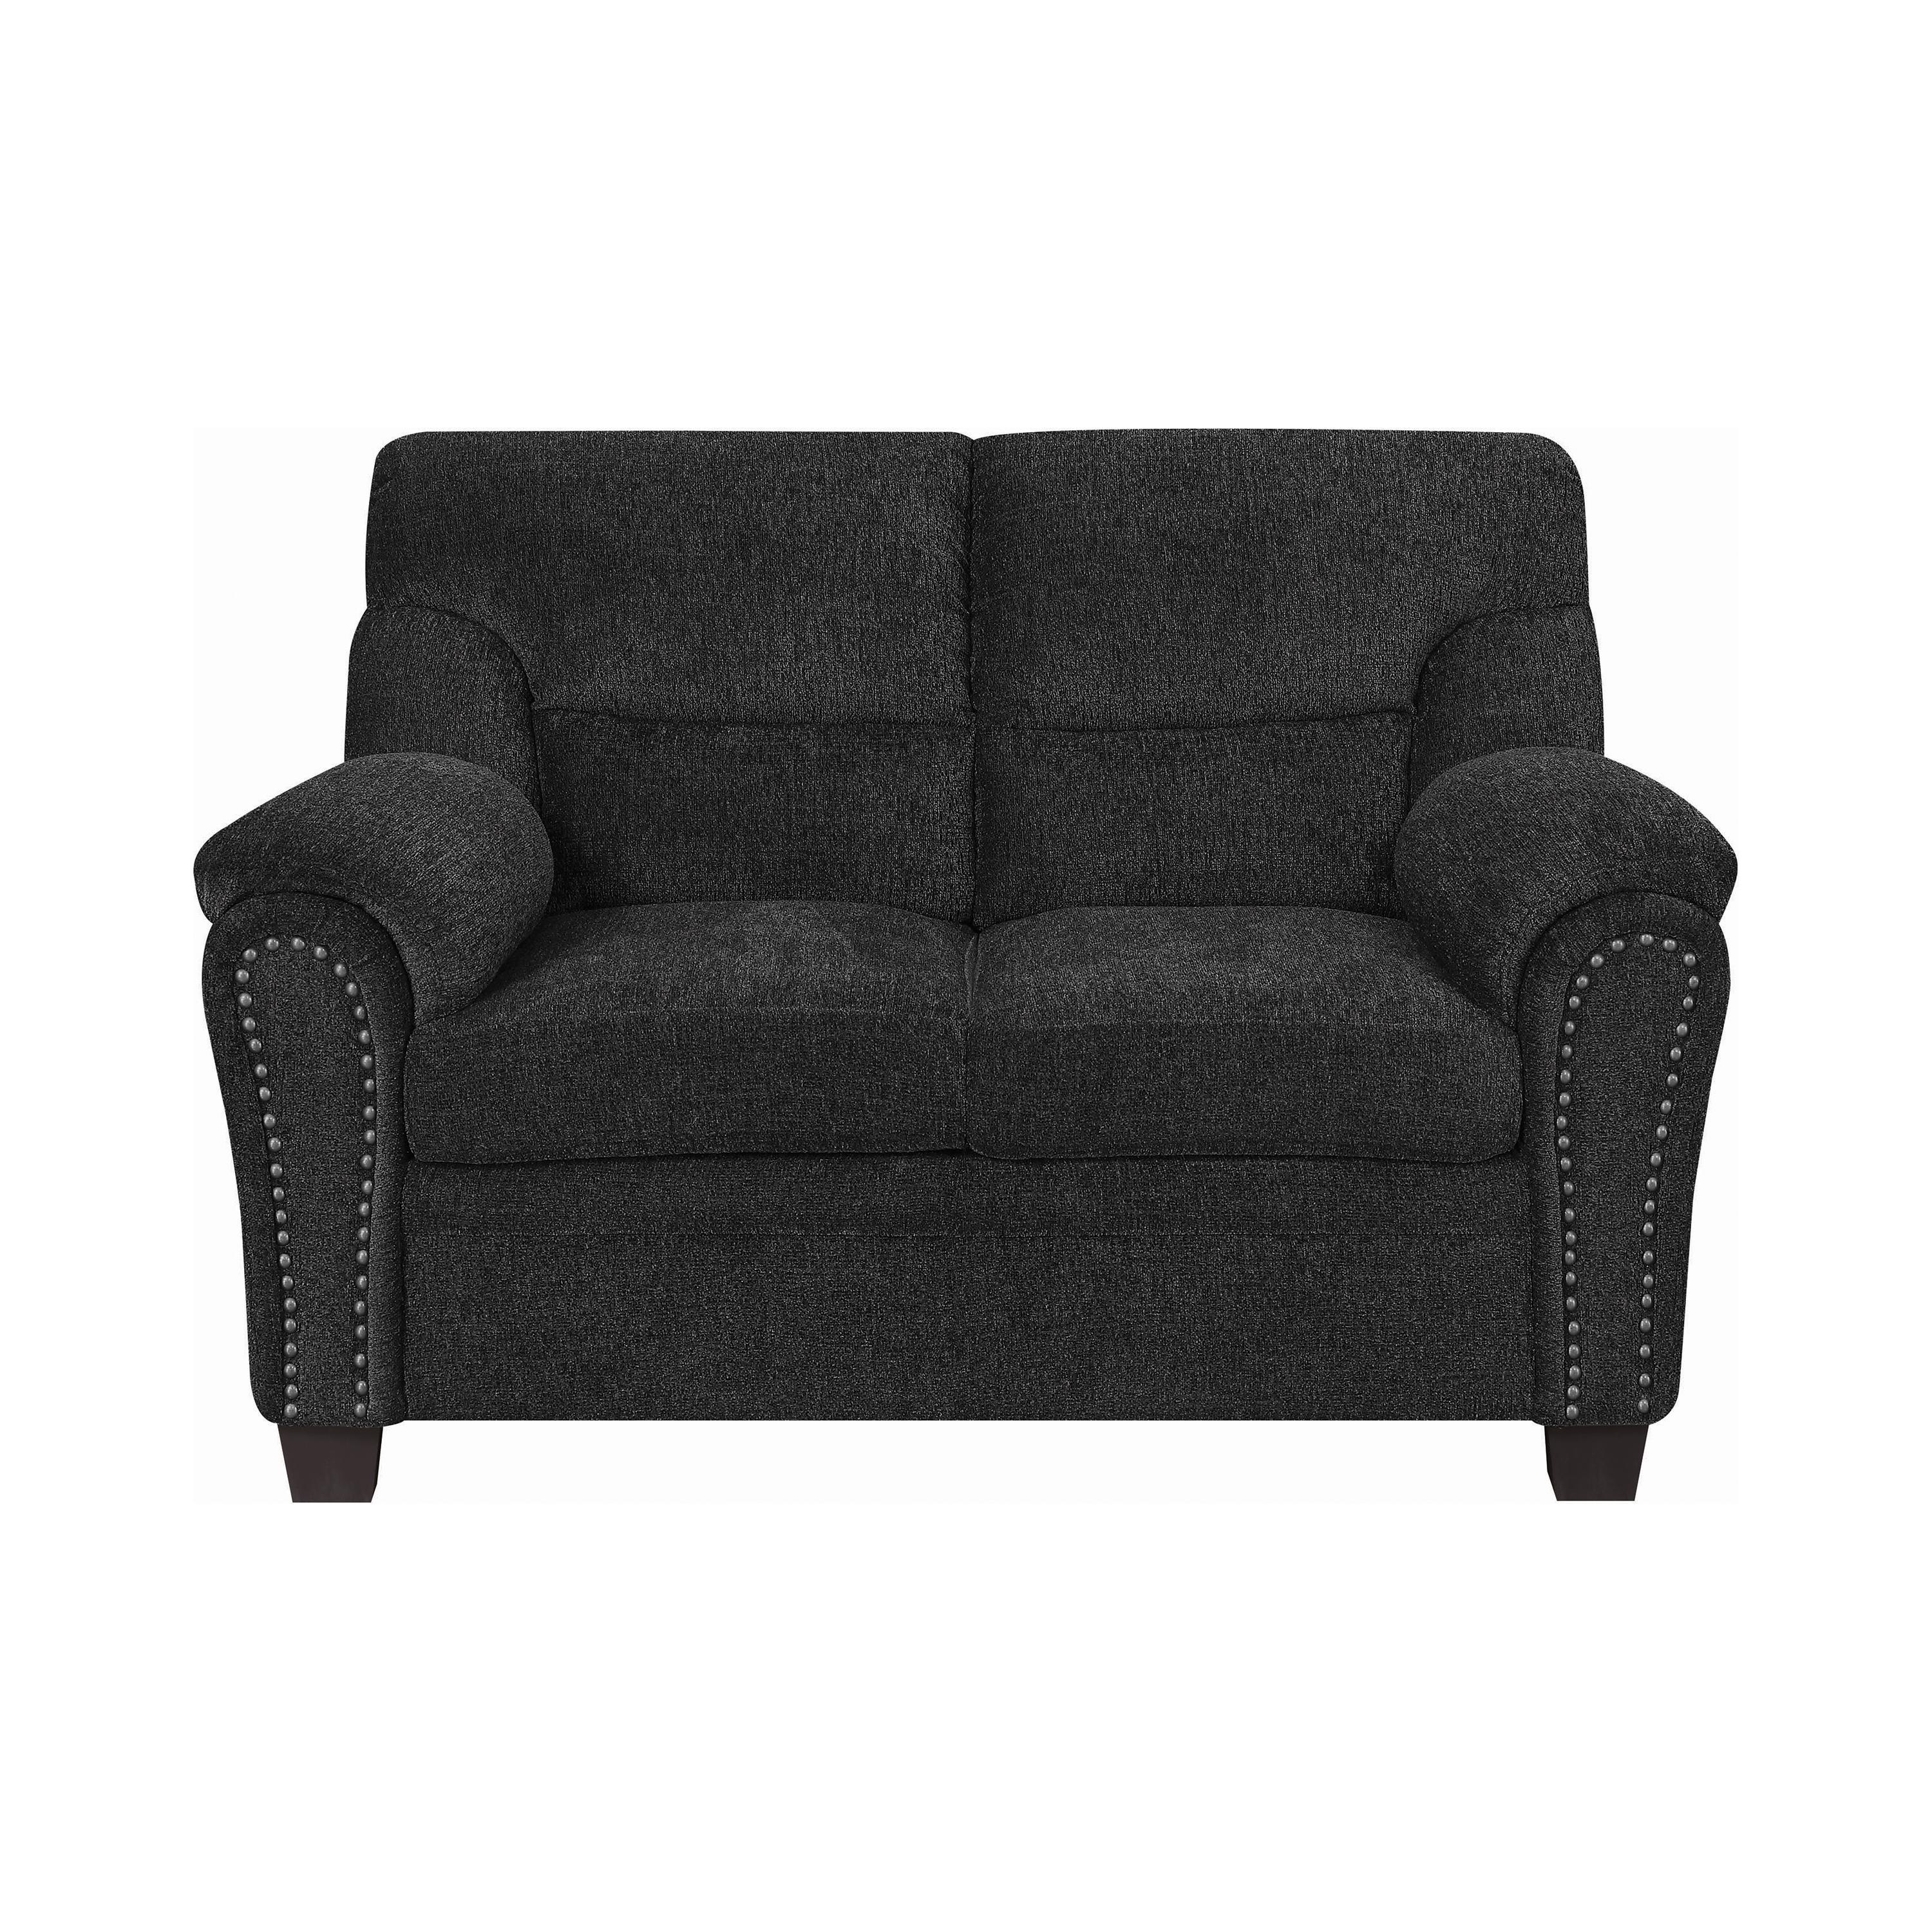 Transitional Loveseat 506575 Clemintine 506575 in Graphite Chenille